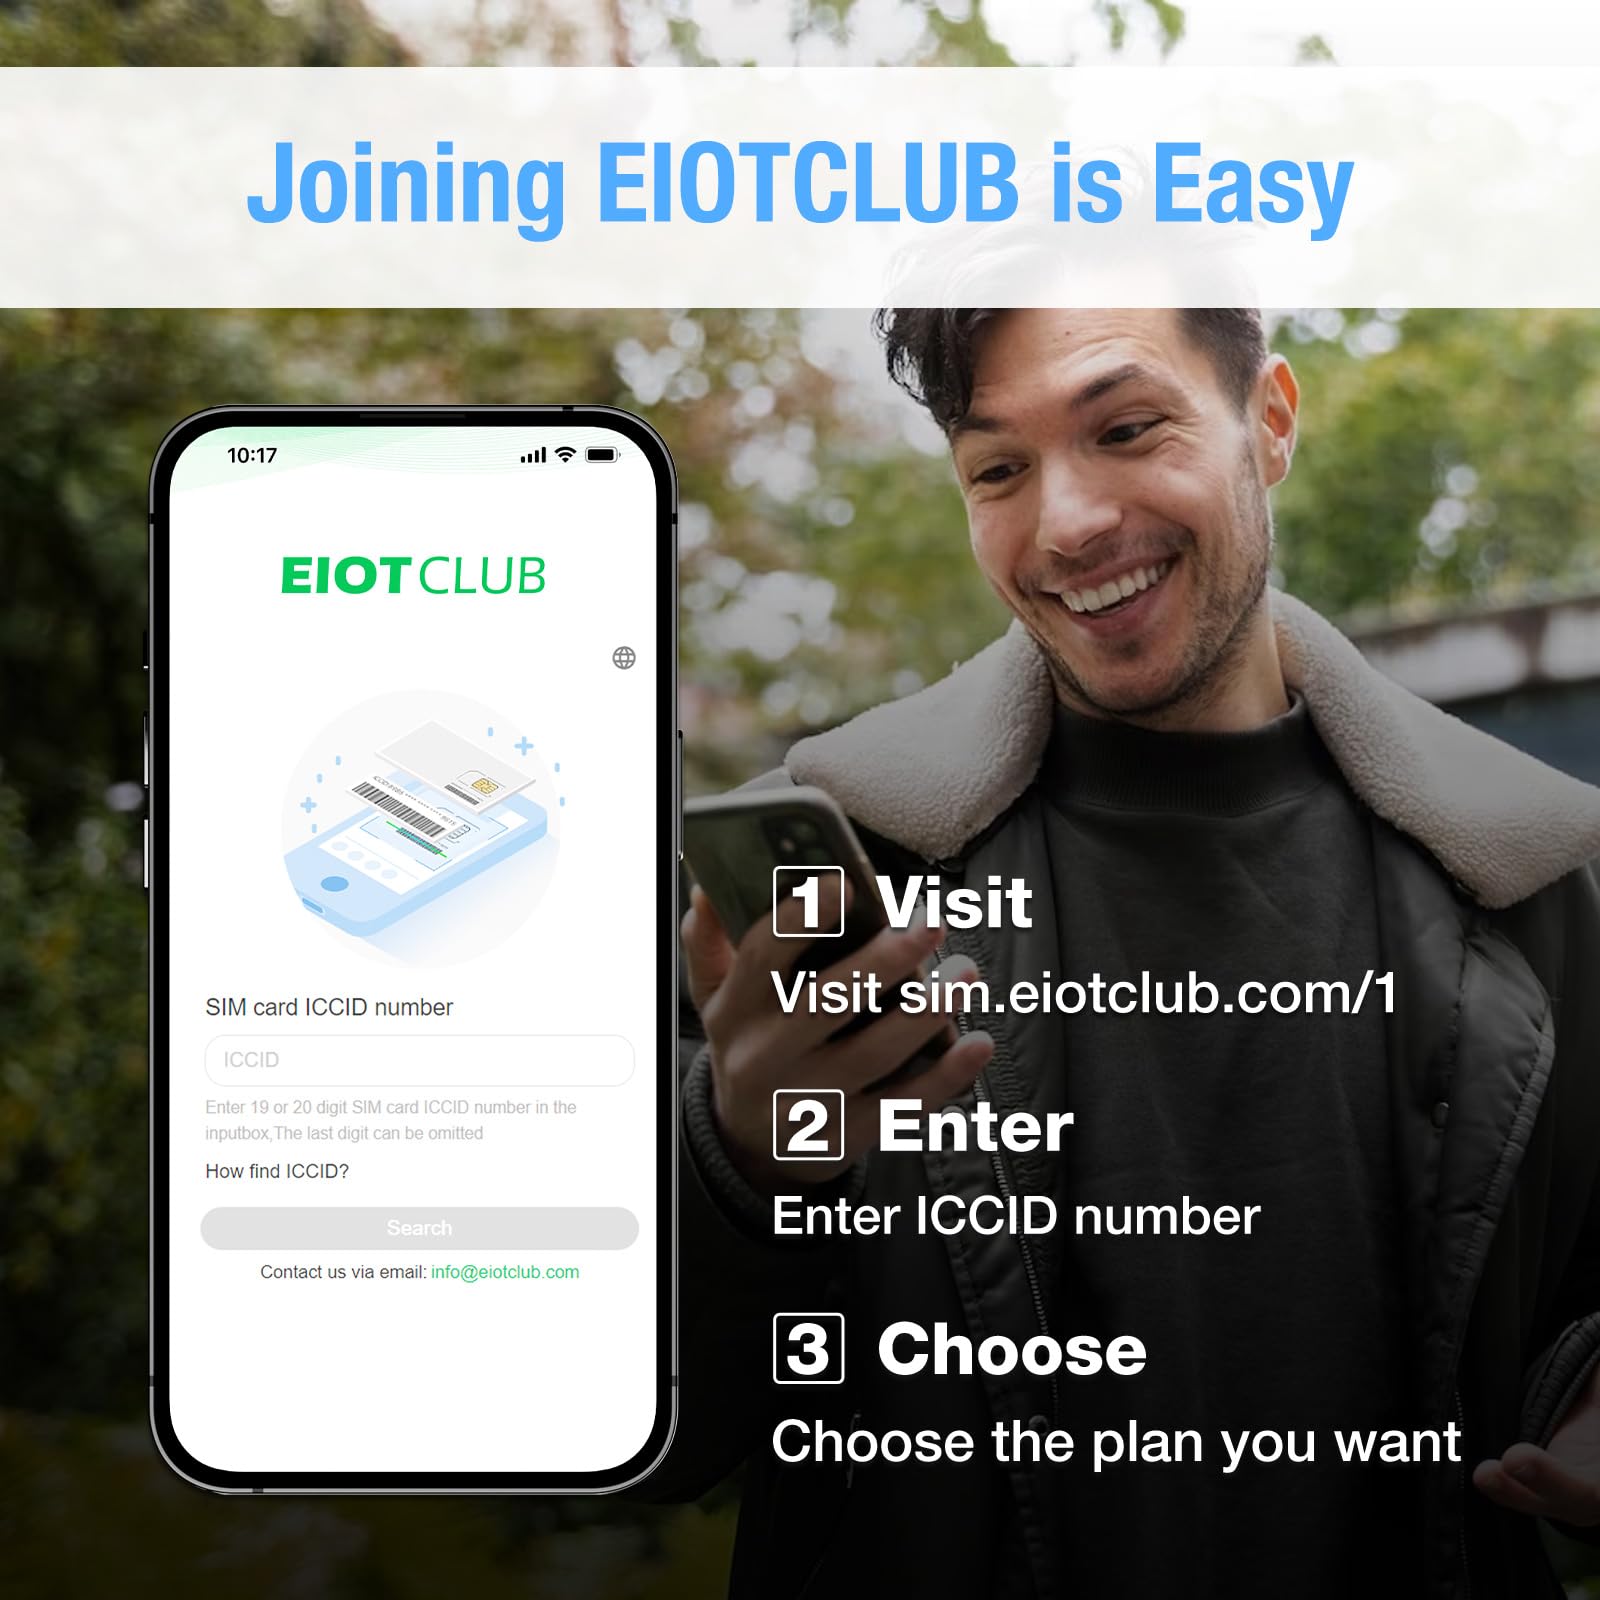 EIOTCLUB Prepaid 4G LTE Cellular SIM Card - No Contract Wireless - USA Compatible with AT&T and T-Mobile Networks for Security and Hunting Trail Game Cameras, GPS Devices- for Data, No Voice & Text